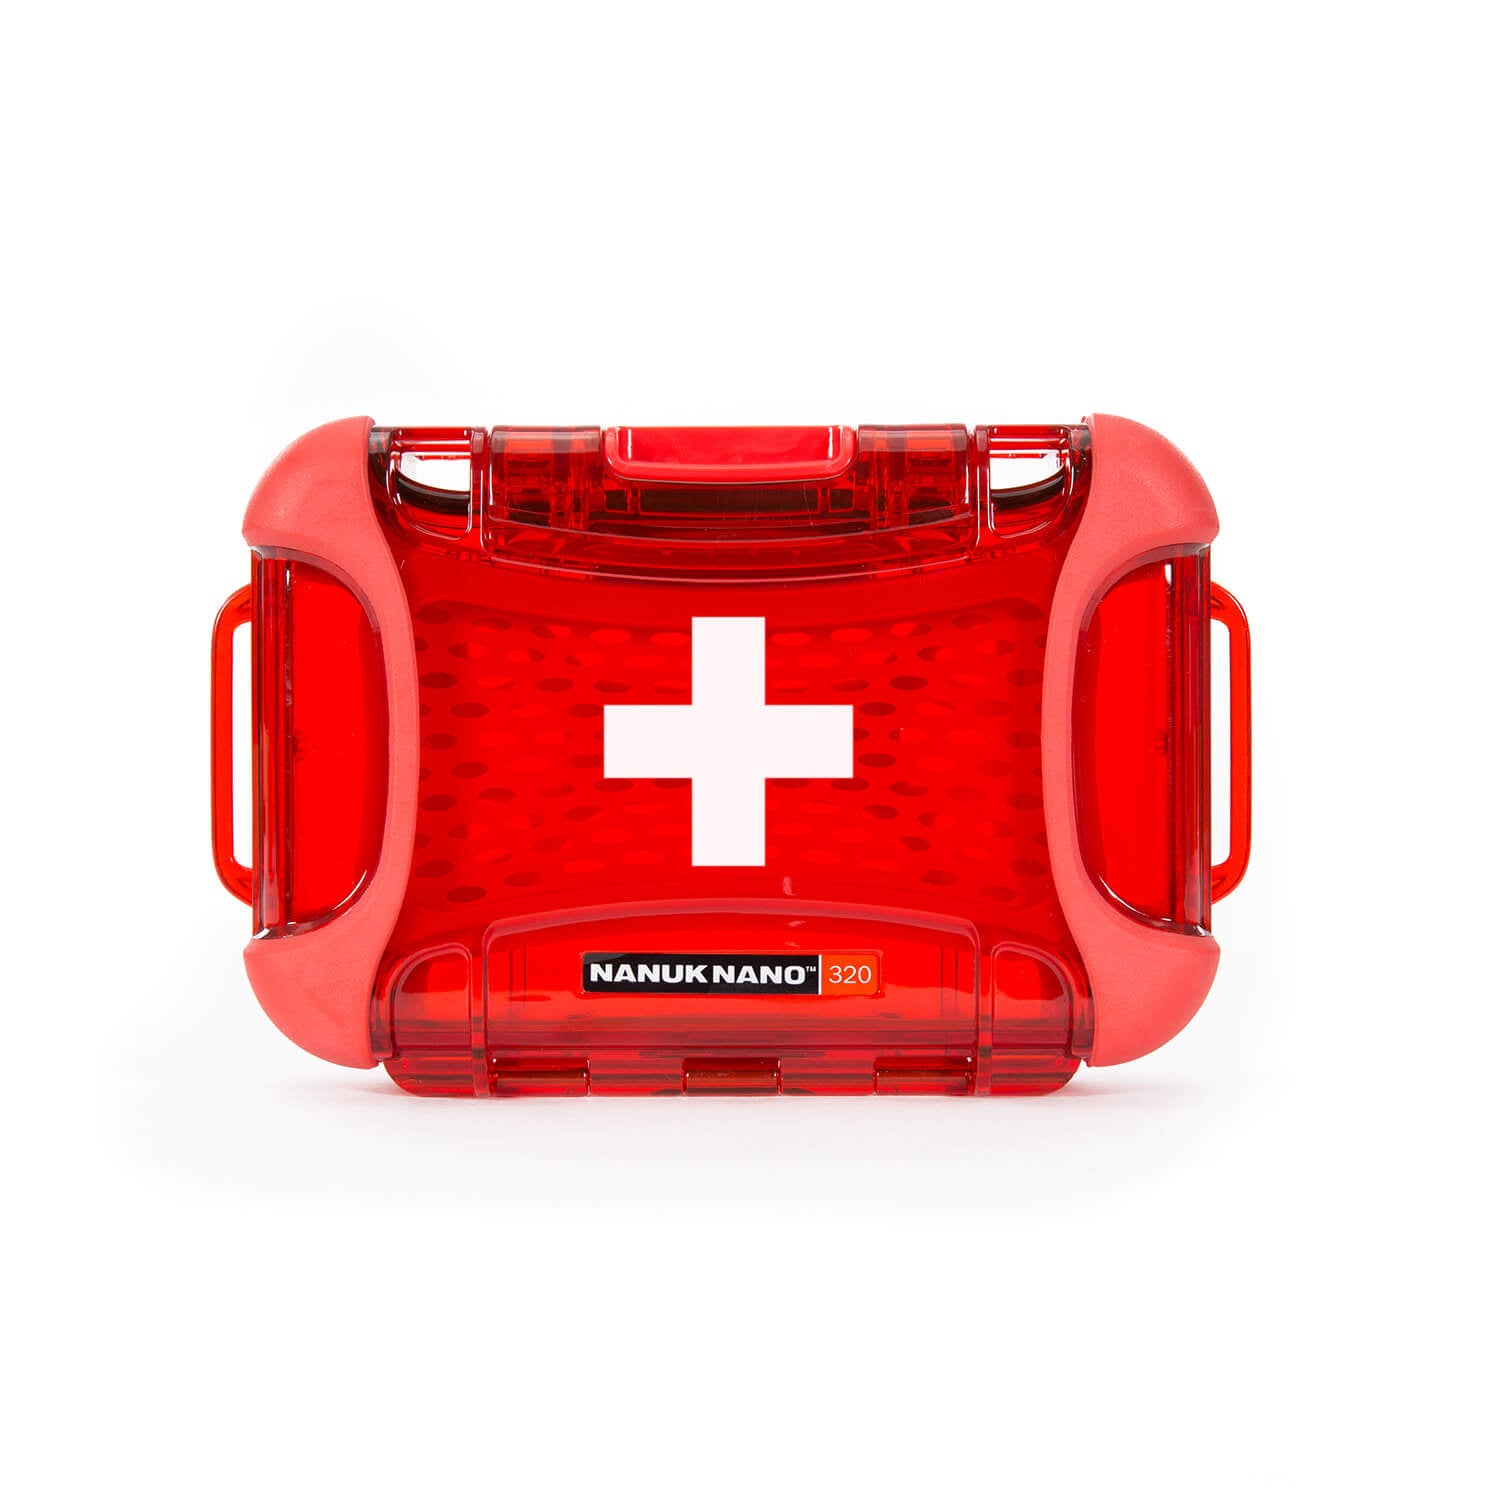 Uneedit First Aid Kit Small Plastic Case For Vehicles V